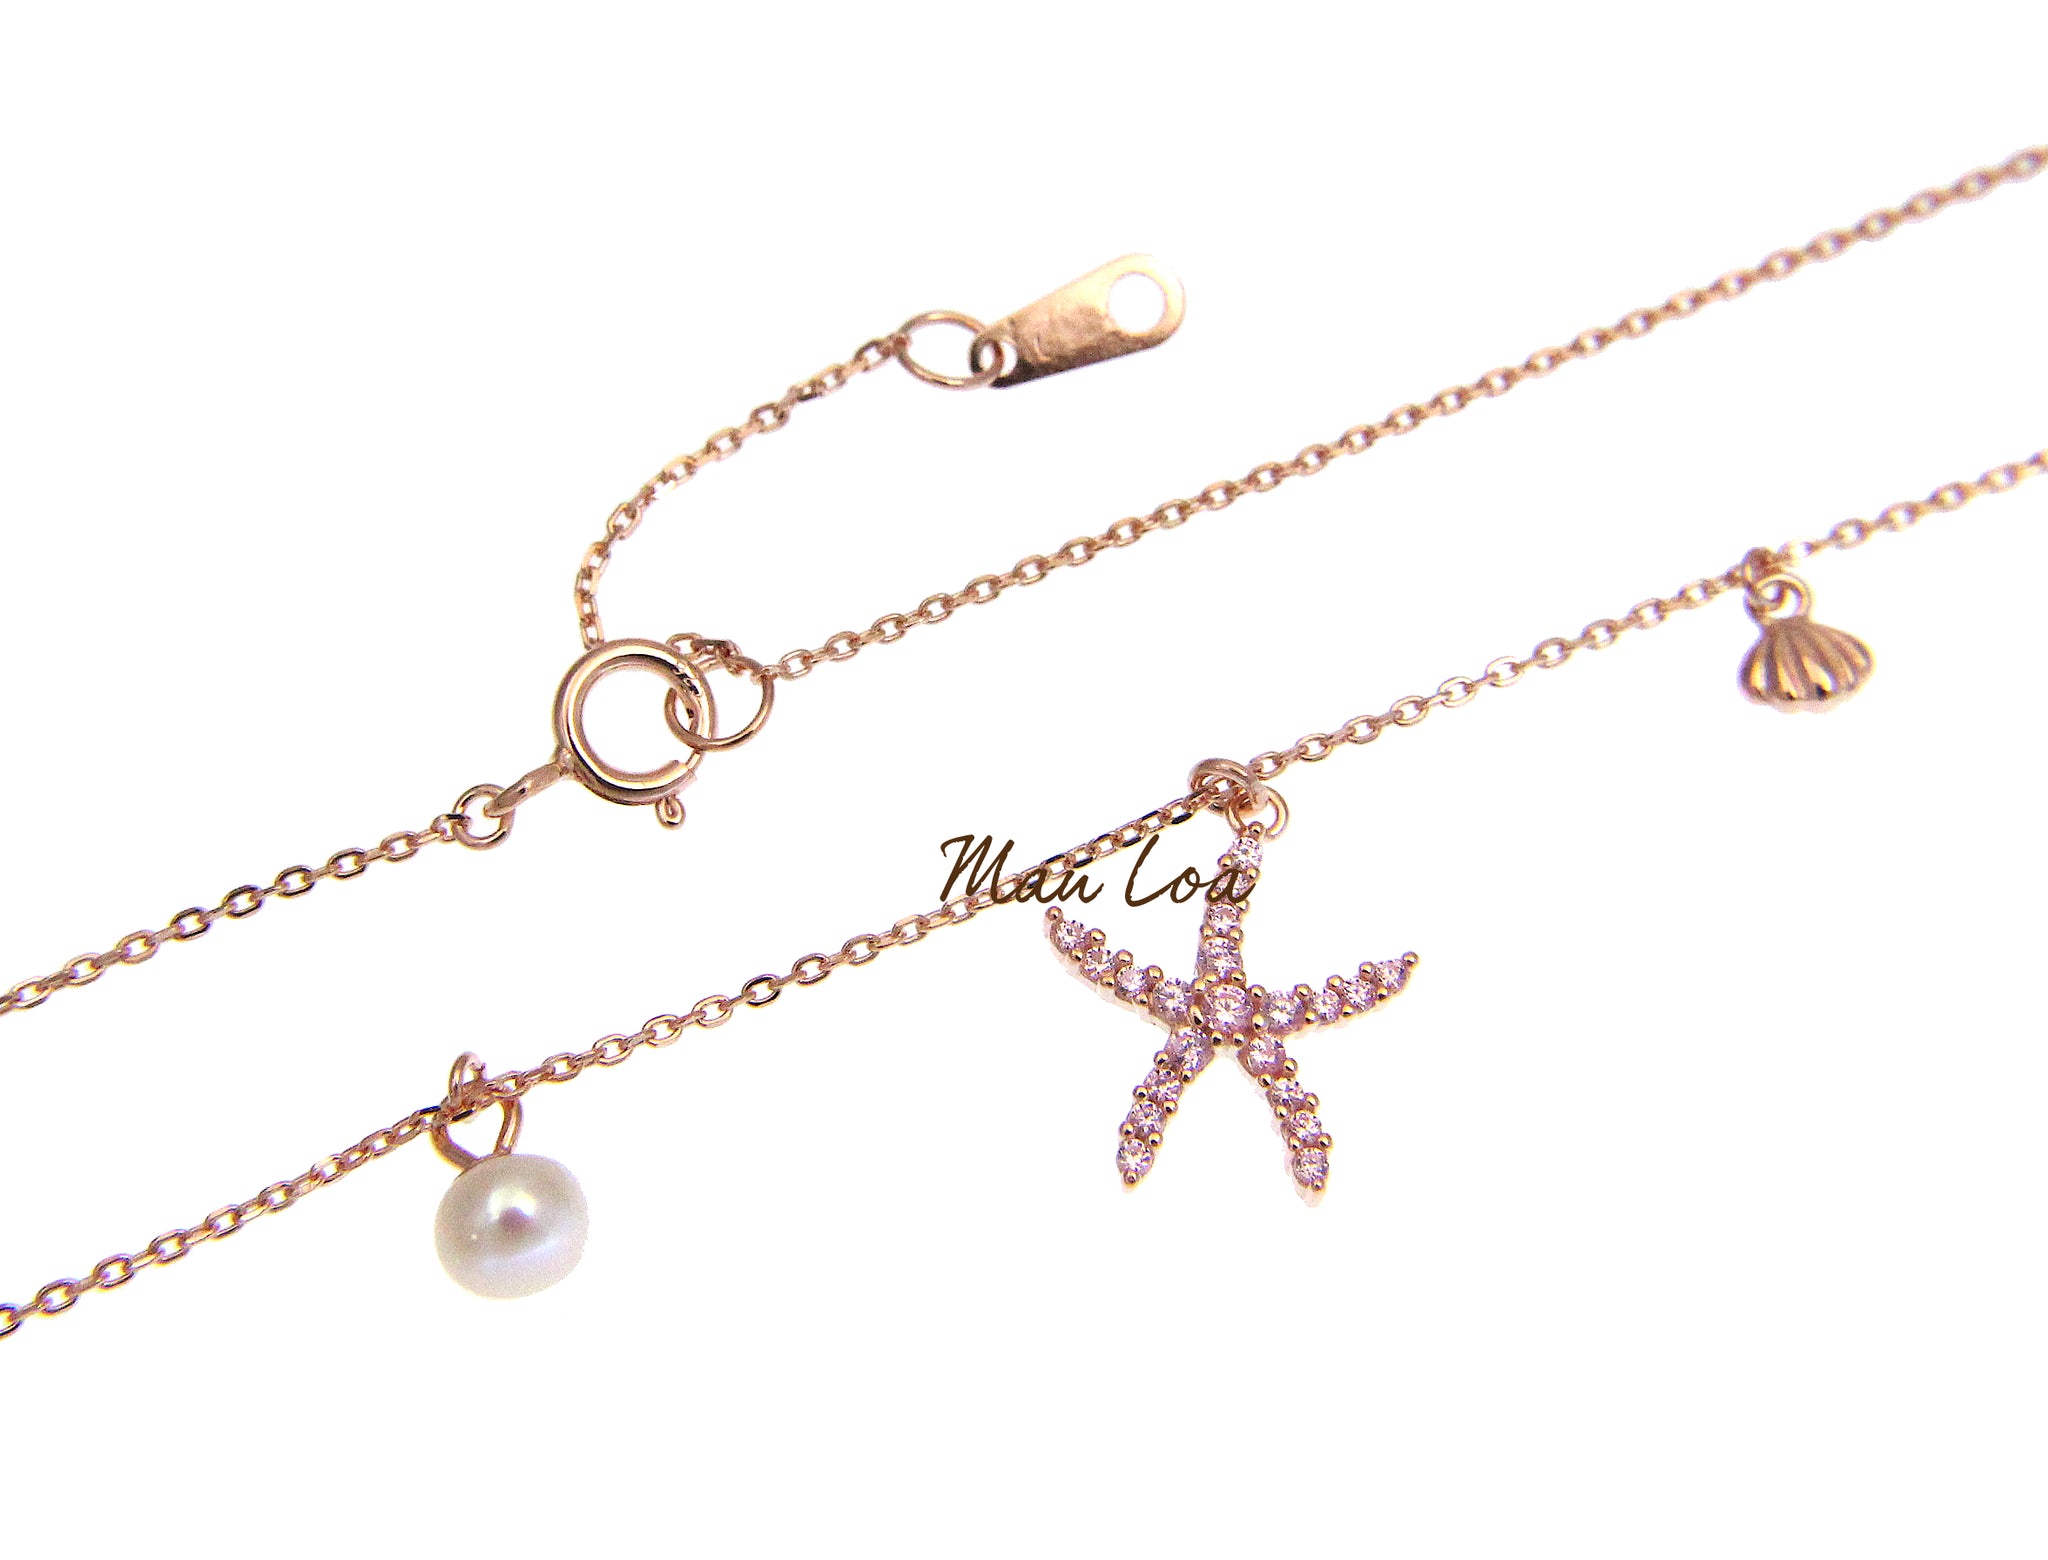 925 Silver Rose Gold Hawaiian Starfish CZ Pearl Necklace Chain Included 16+1"